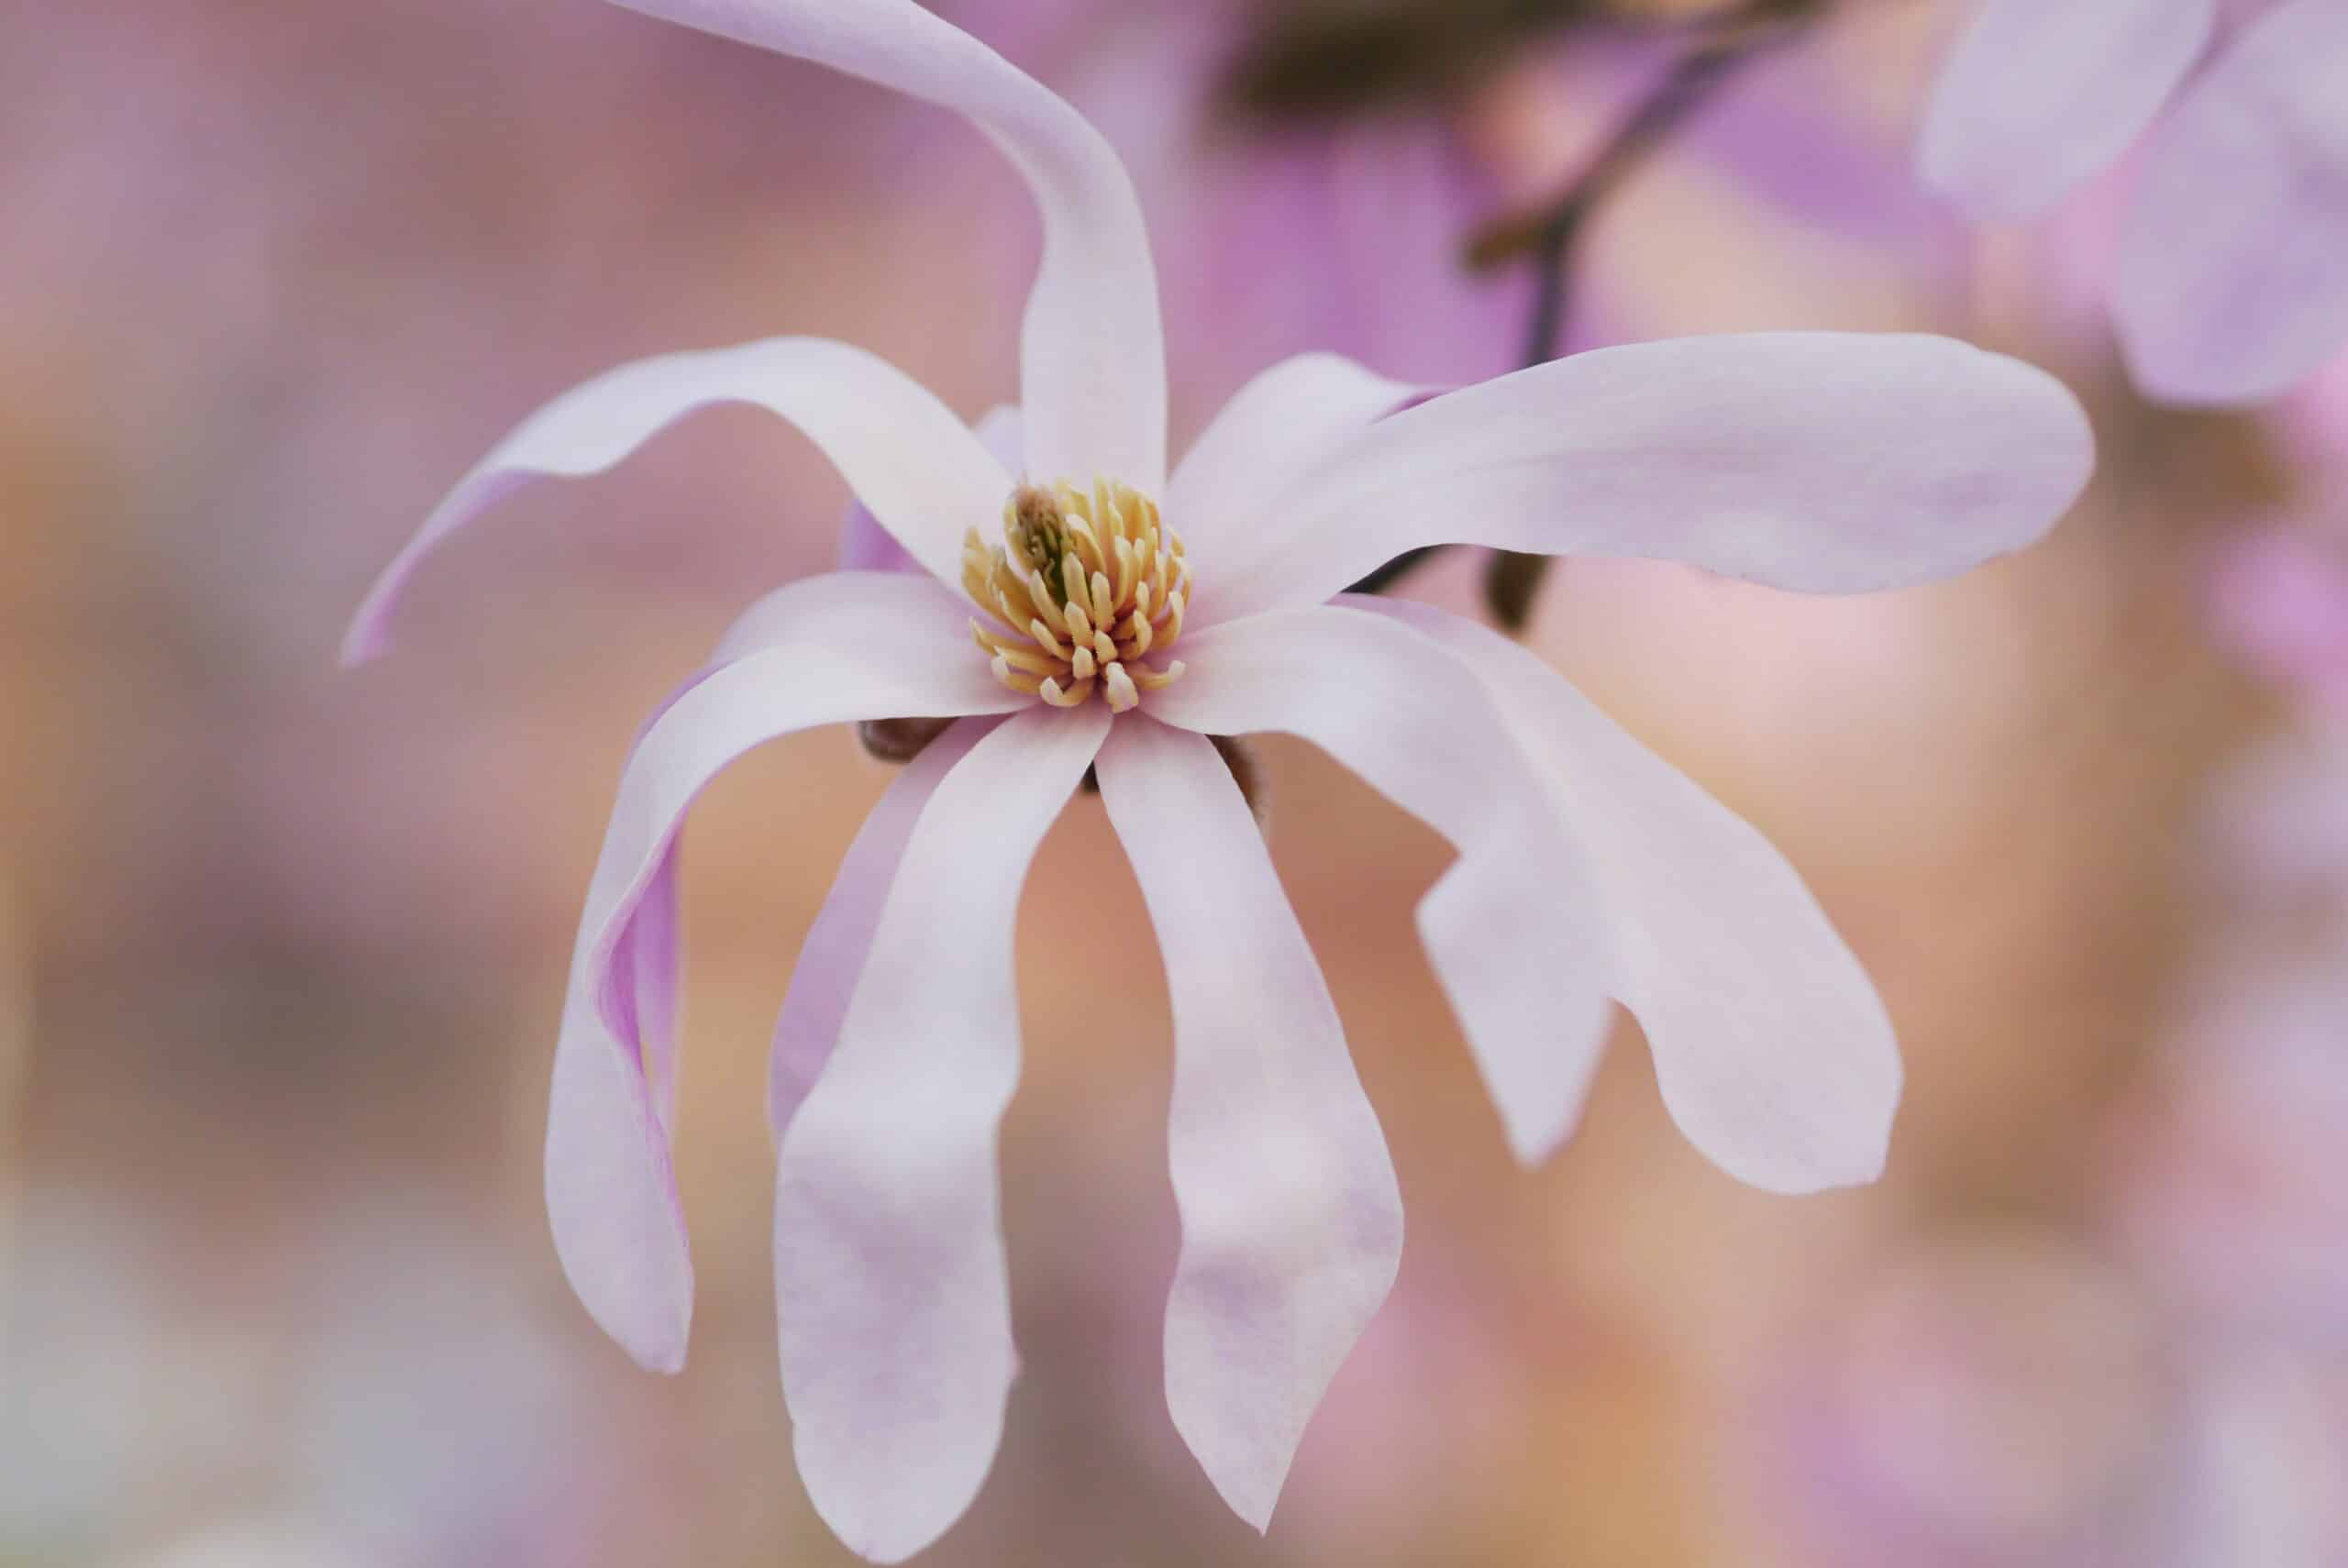 discover the beauty of magnolia trees with their stunning flowers and graceful branches. learn about growing and caring for magnolia trees in your garden.